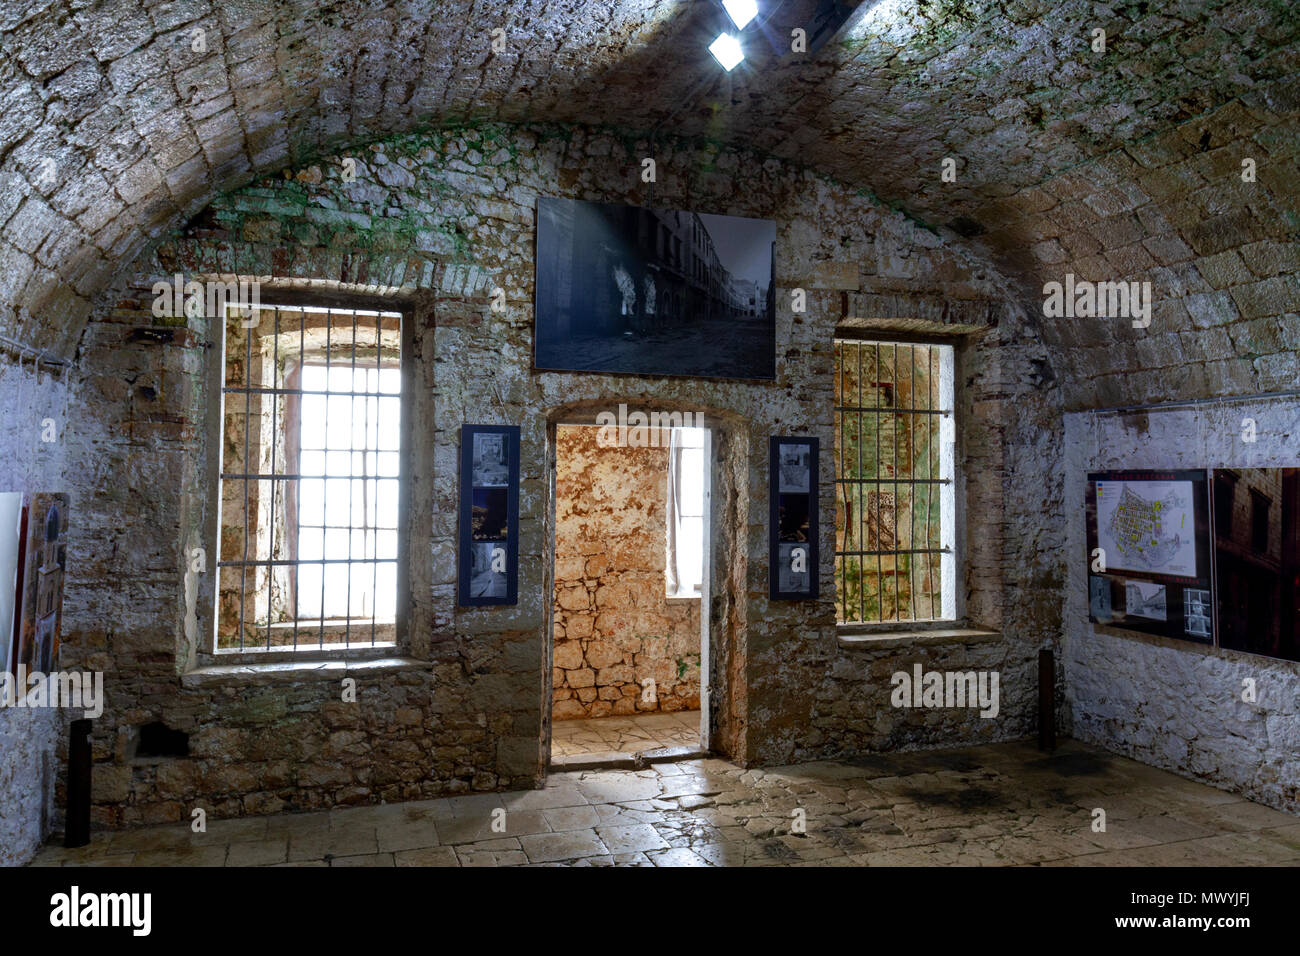 Inside the Fort Imperial museum on Mount Sud, overlooking Dubrovnik, Croatia. Stock Photo